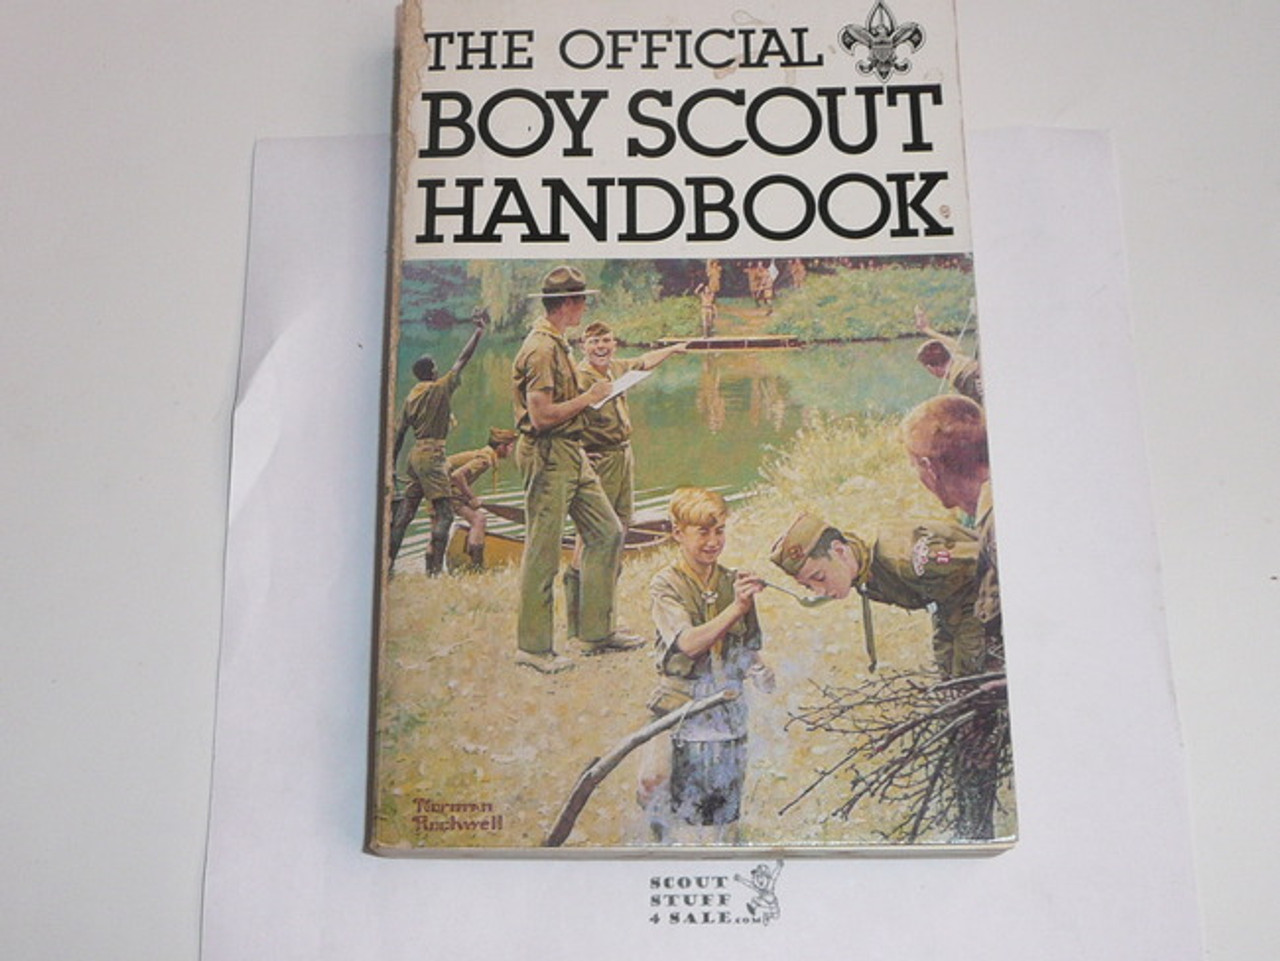 1979 Boy Scout Handbook, Ninth Edition, First Printing, Used condition